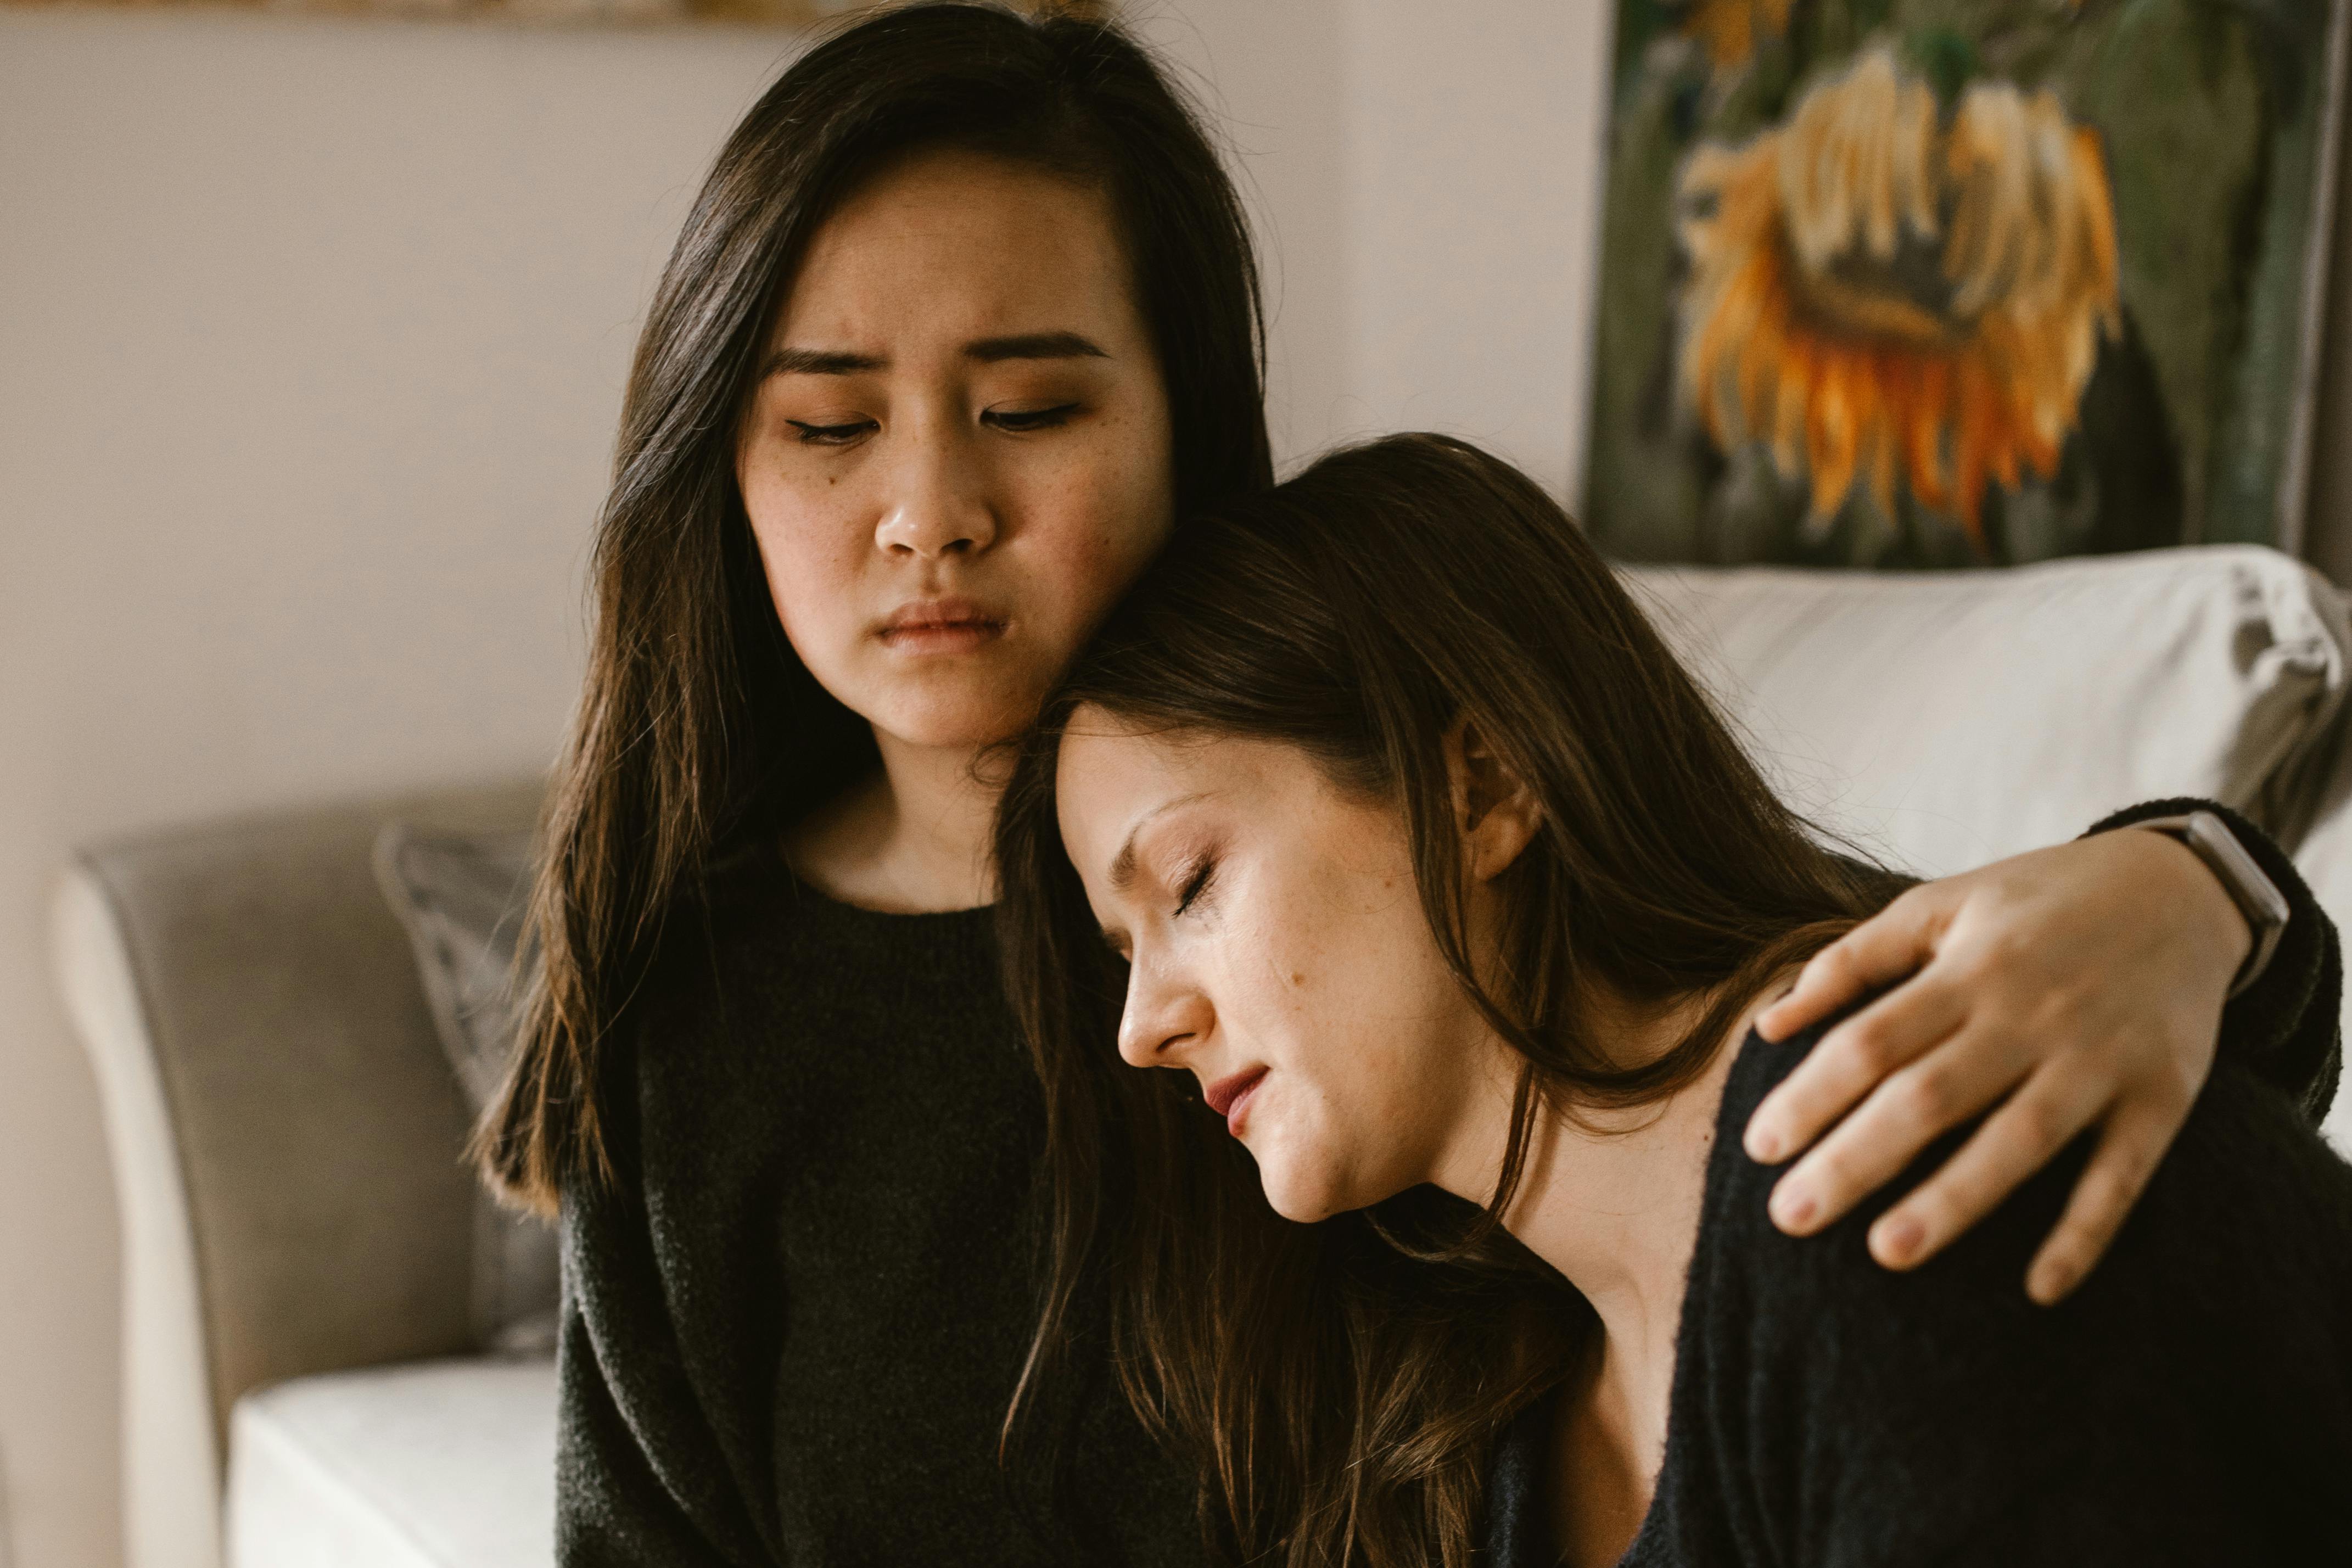 Friends comforting each other | Source: Pexels